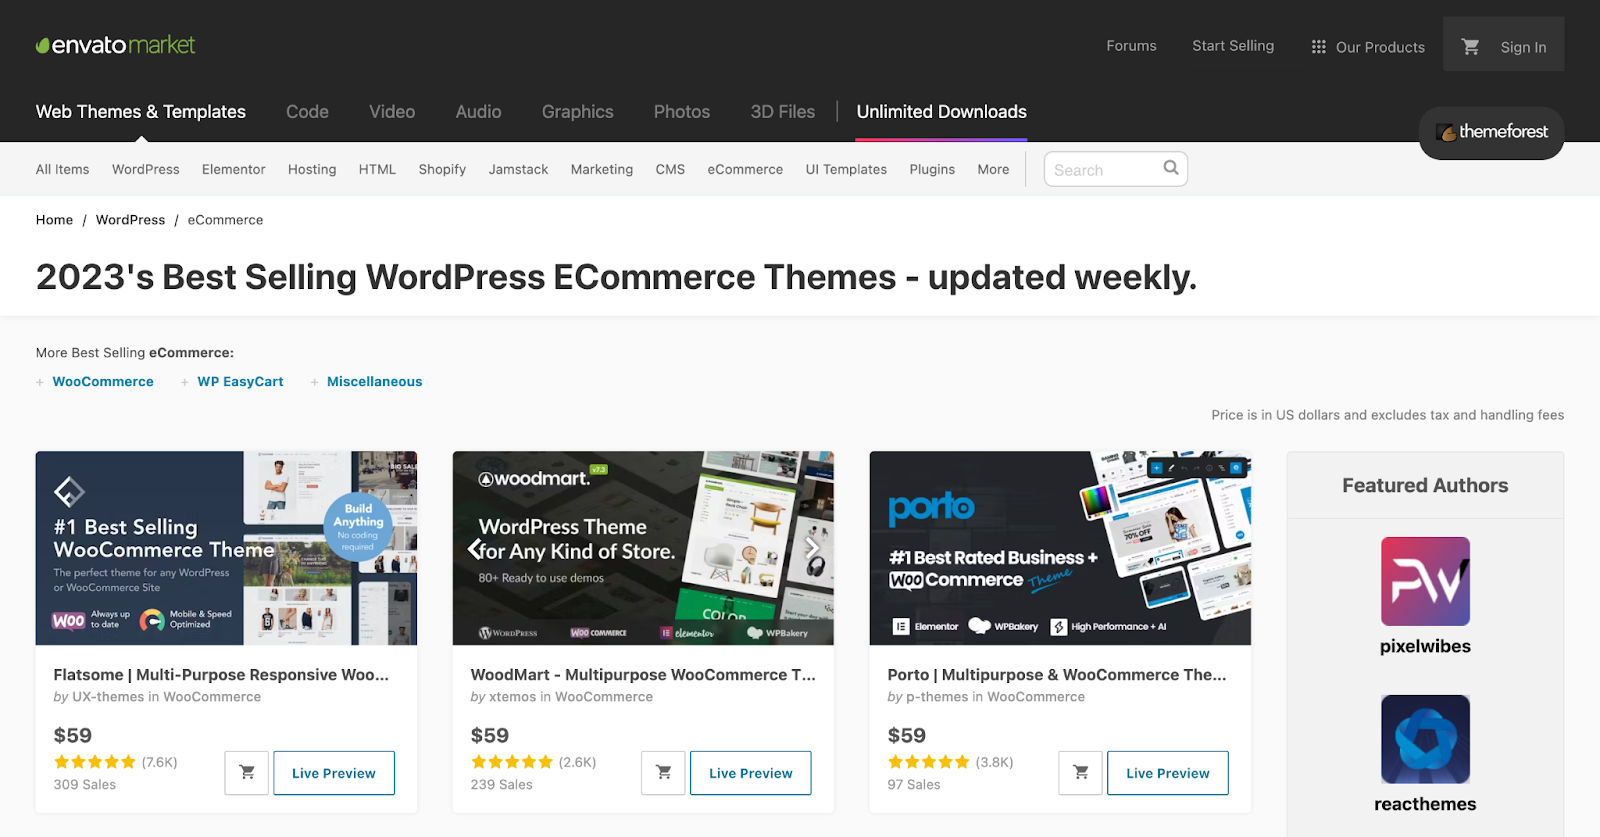 How to make an ecommerce website with WordPress: ThemeForest is a template library that offers thousands of WordPress templates. 